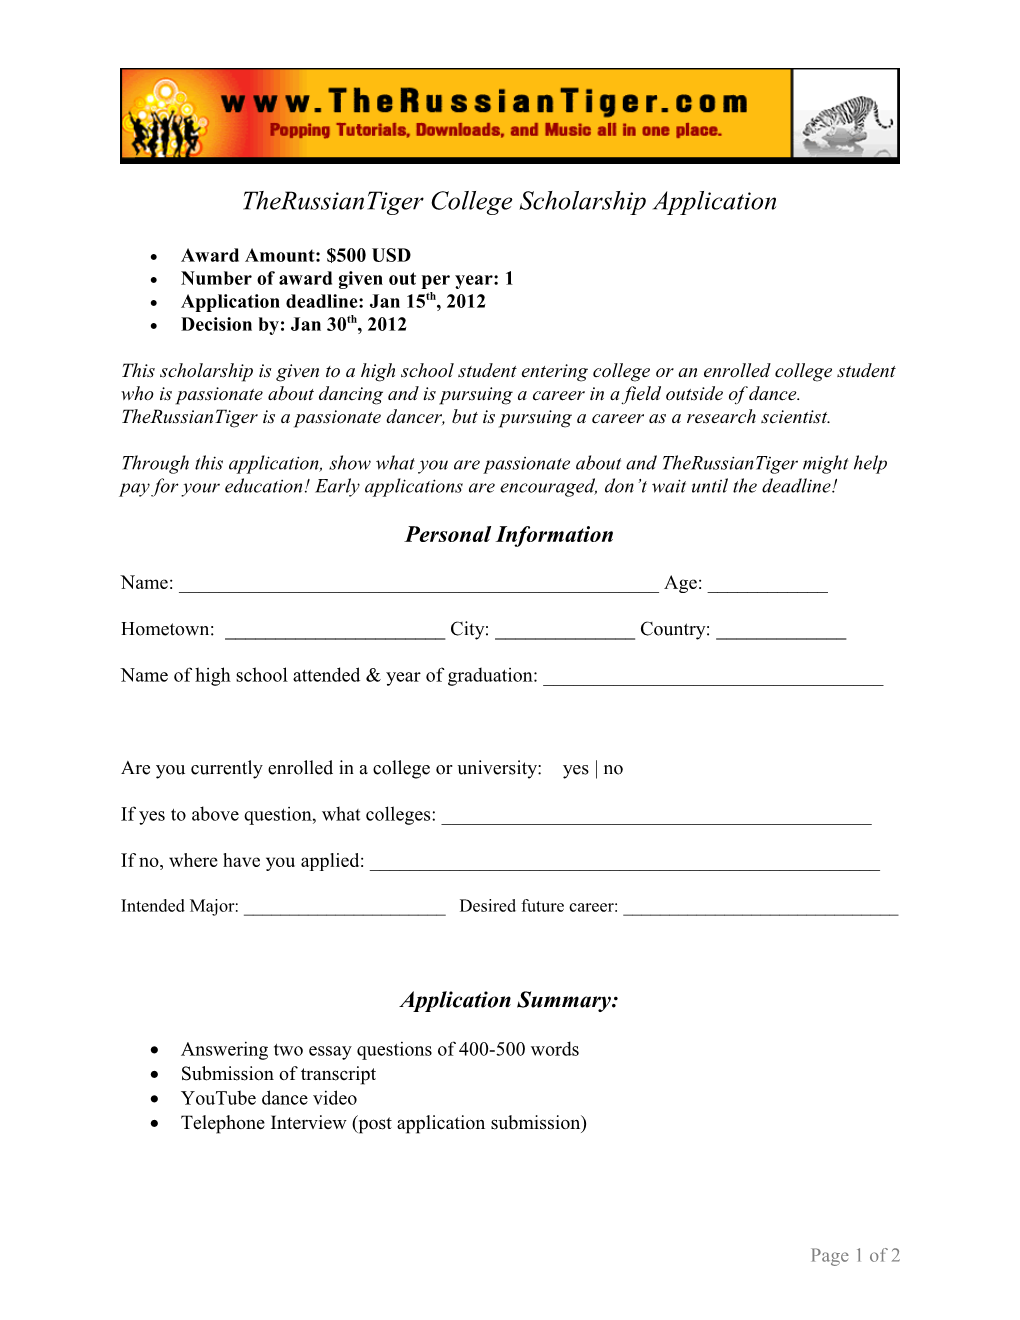 Therussiantiger College Scholarship Application